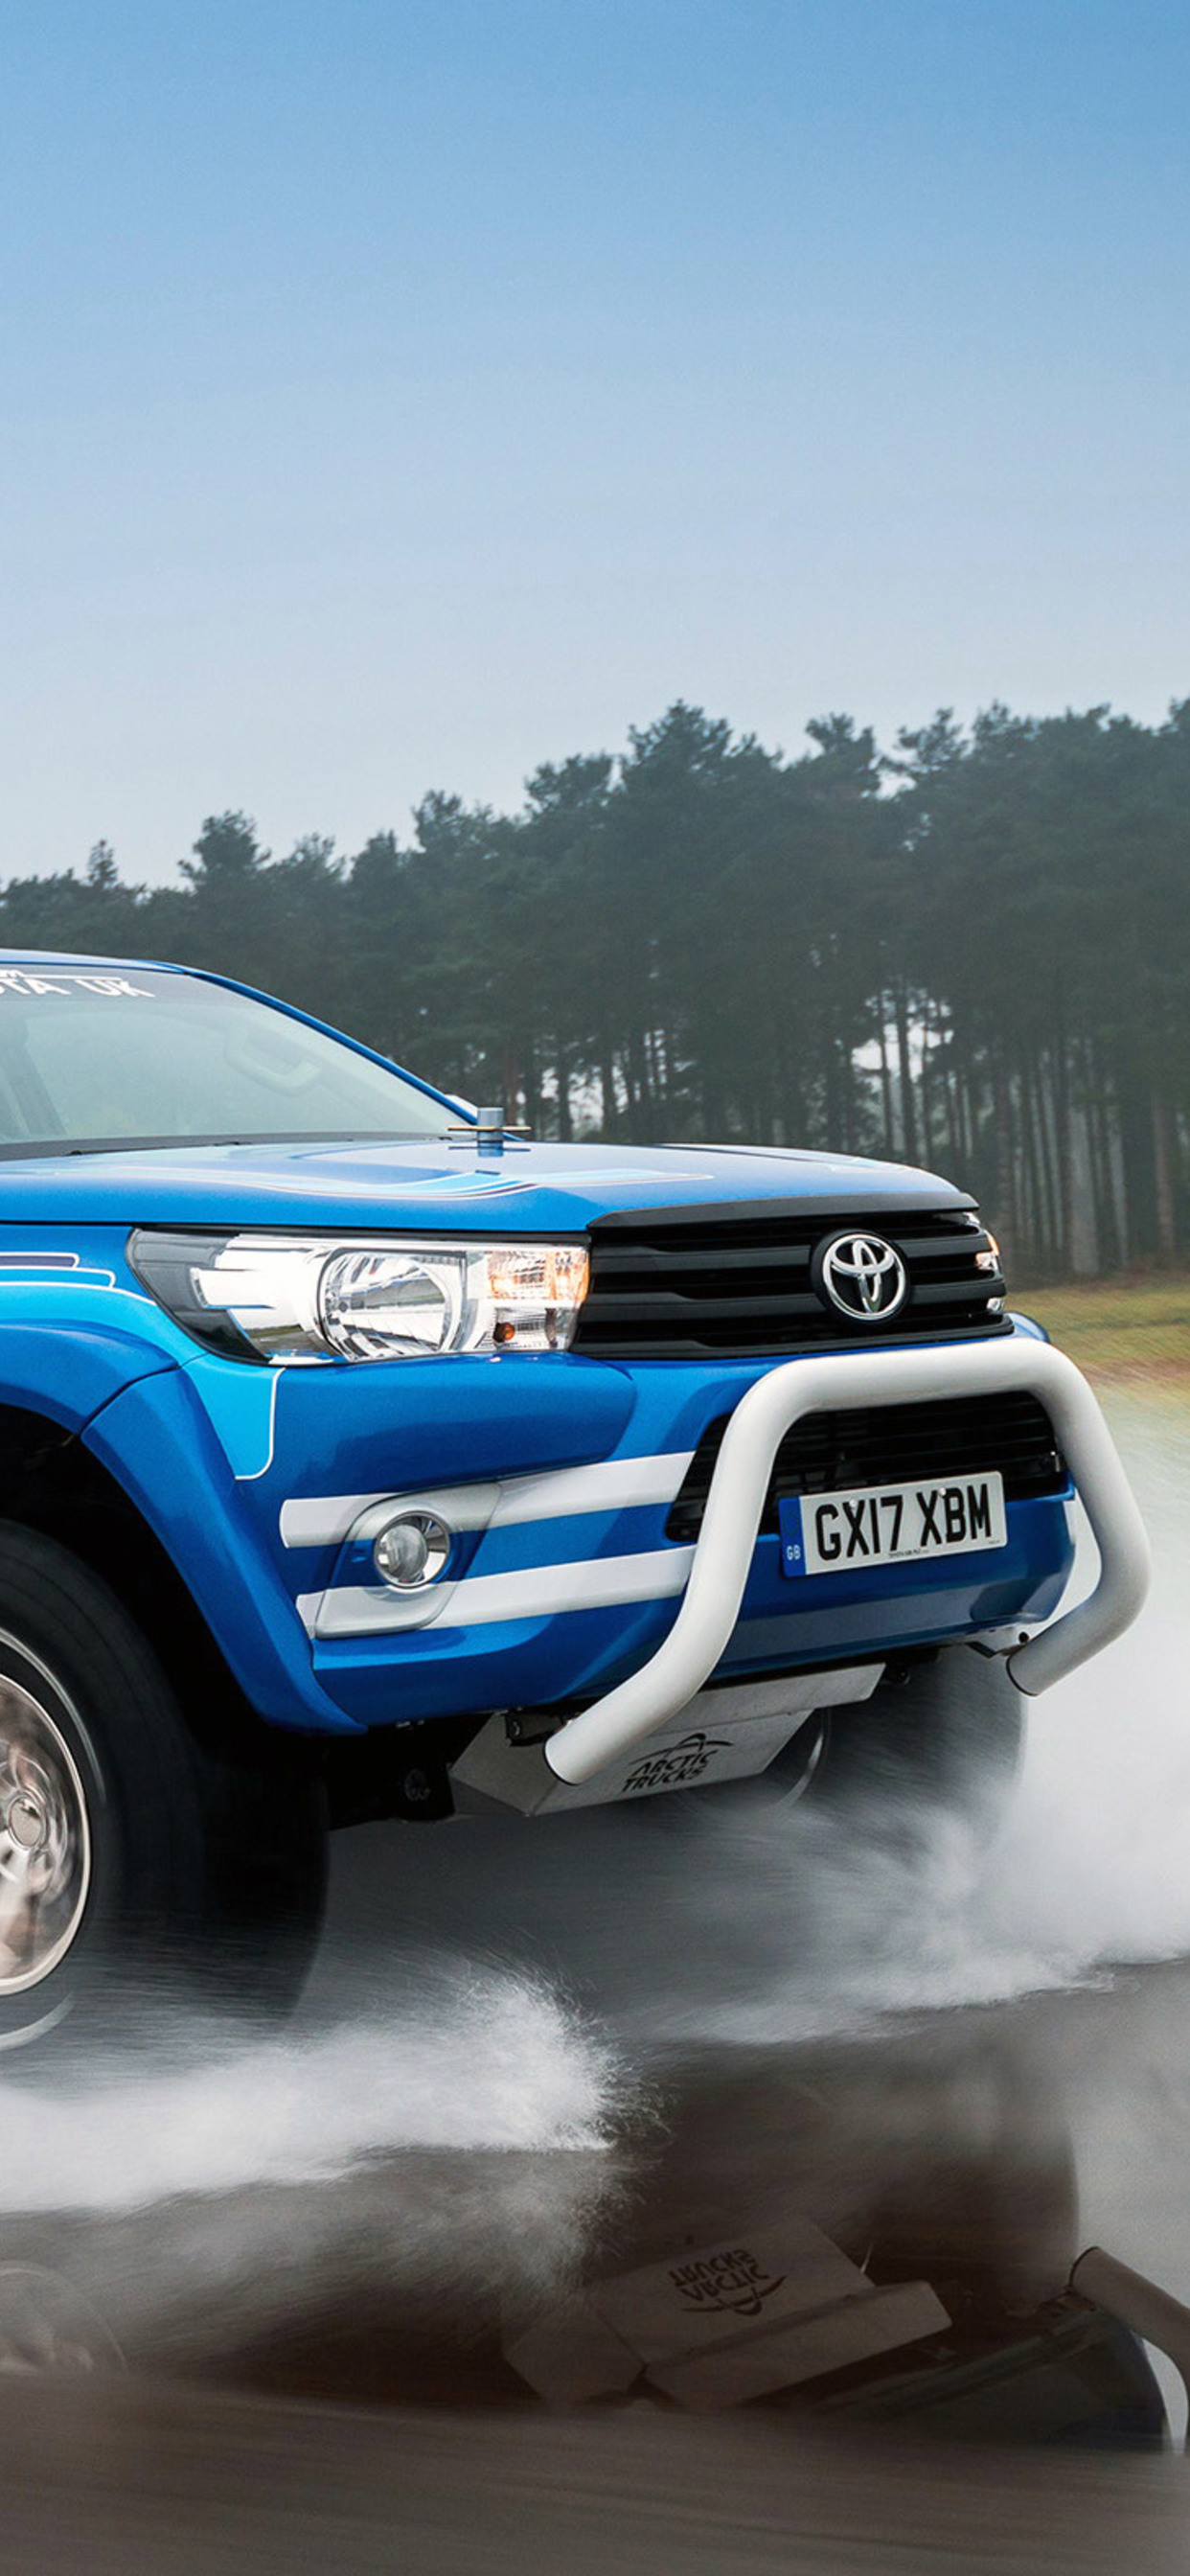 2017 Toyota Hilux Bruiser - Toyota Hilux Bruiser , HD Wallpaper & Backgrounds